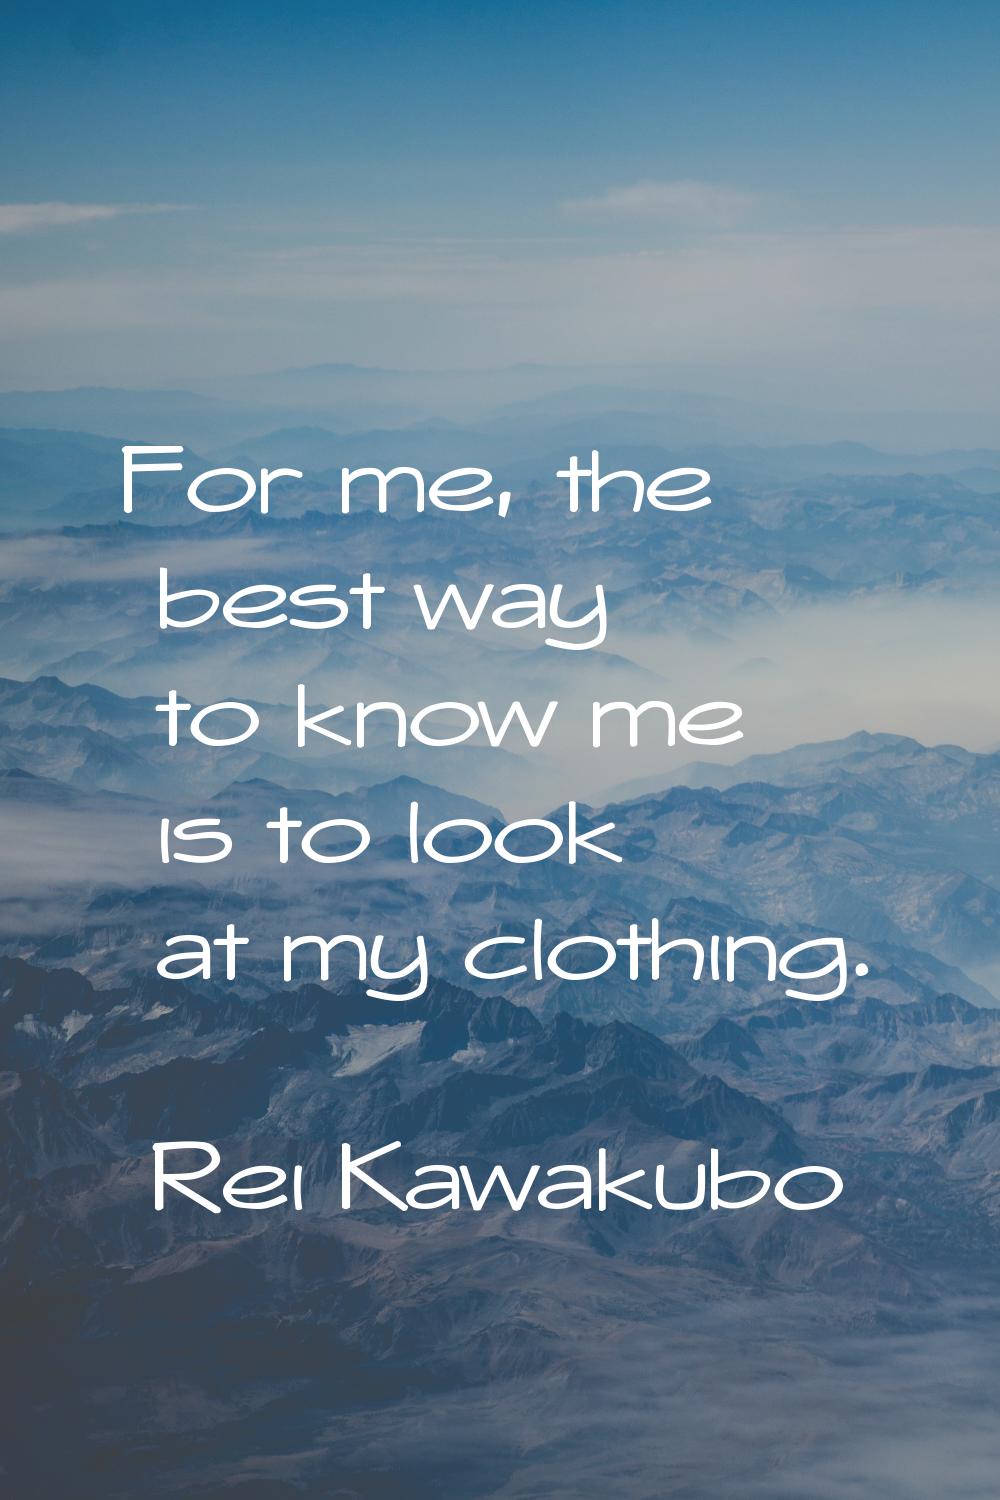 For me, the best way to know me is to look at my clothing.